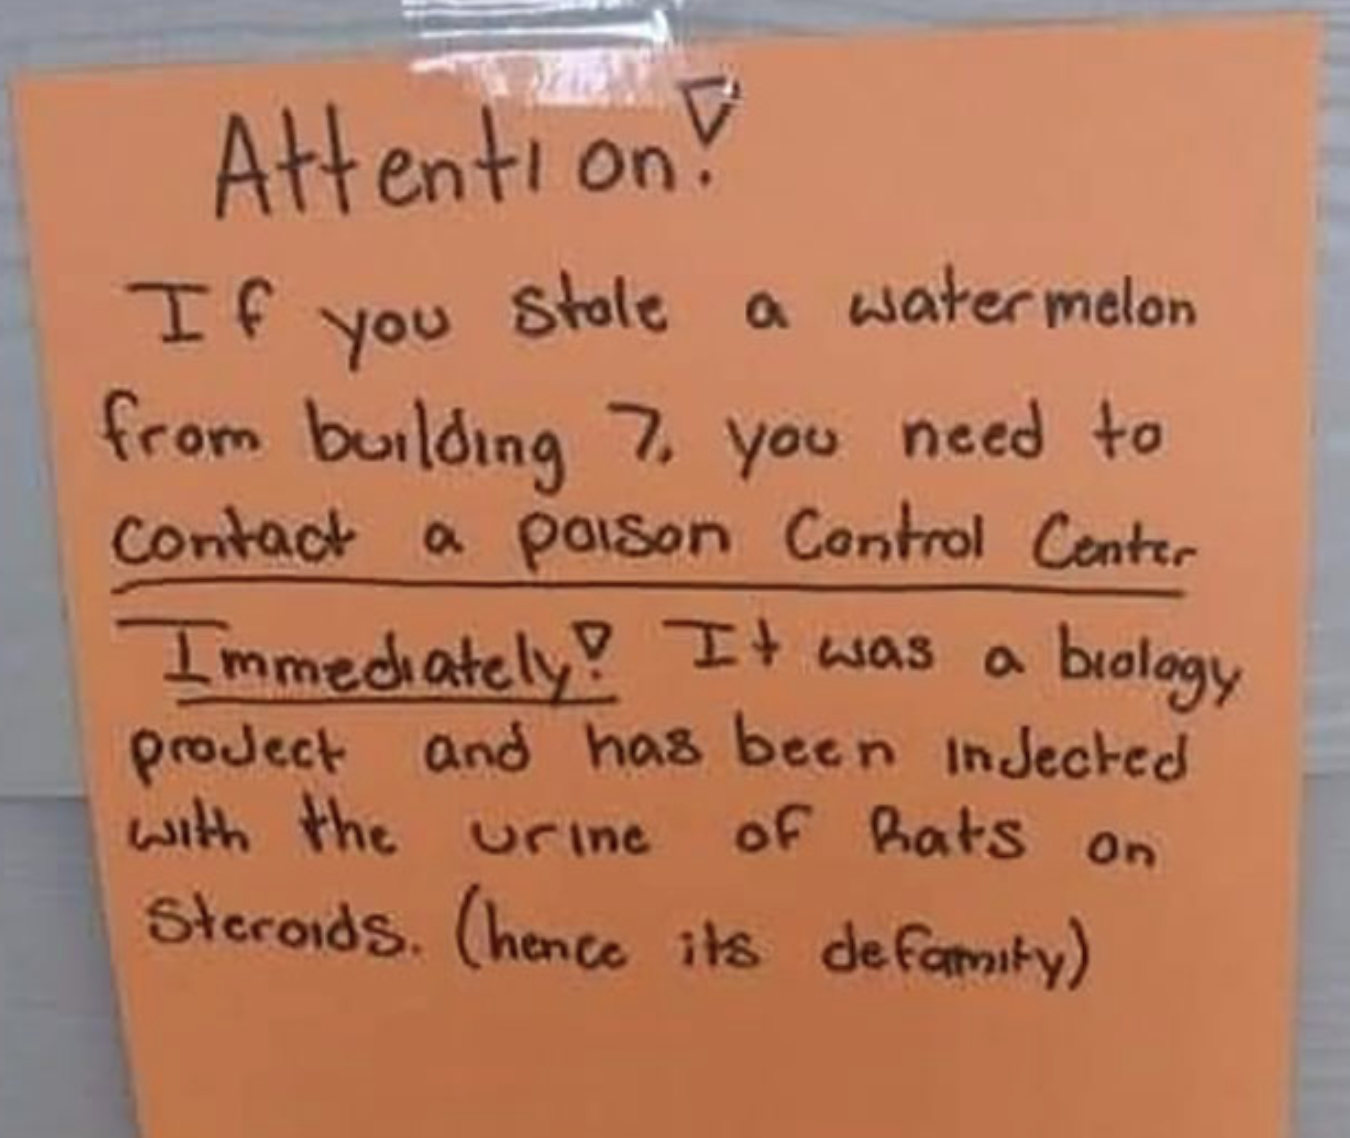 attention if you stole a watermelon from builidng 7 you need to control a poison control center immediately, it was a biology project and has been injected with urine of rats on steriods